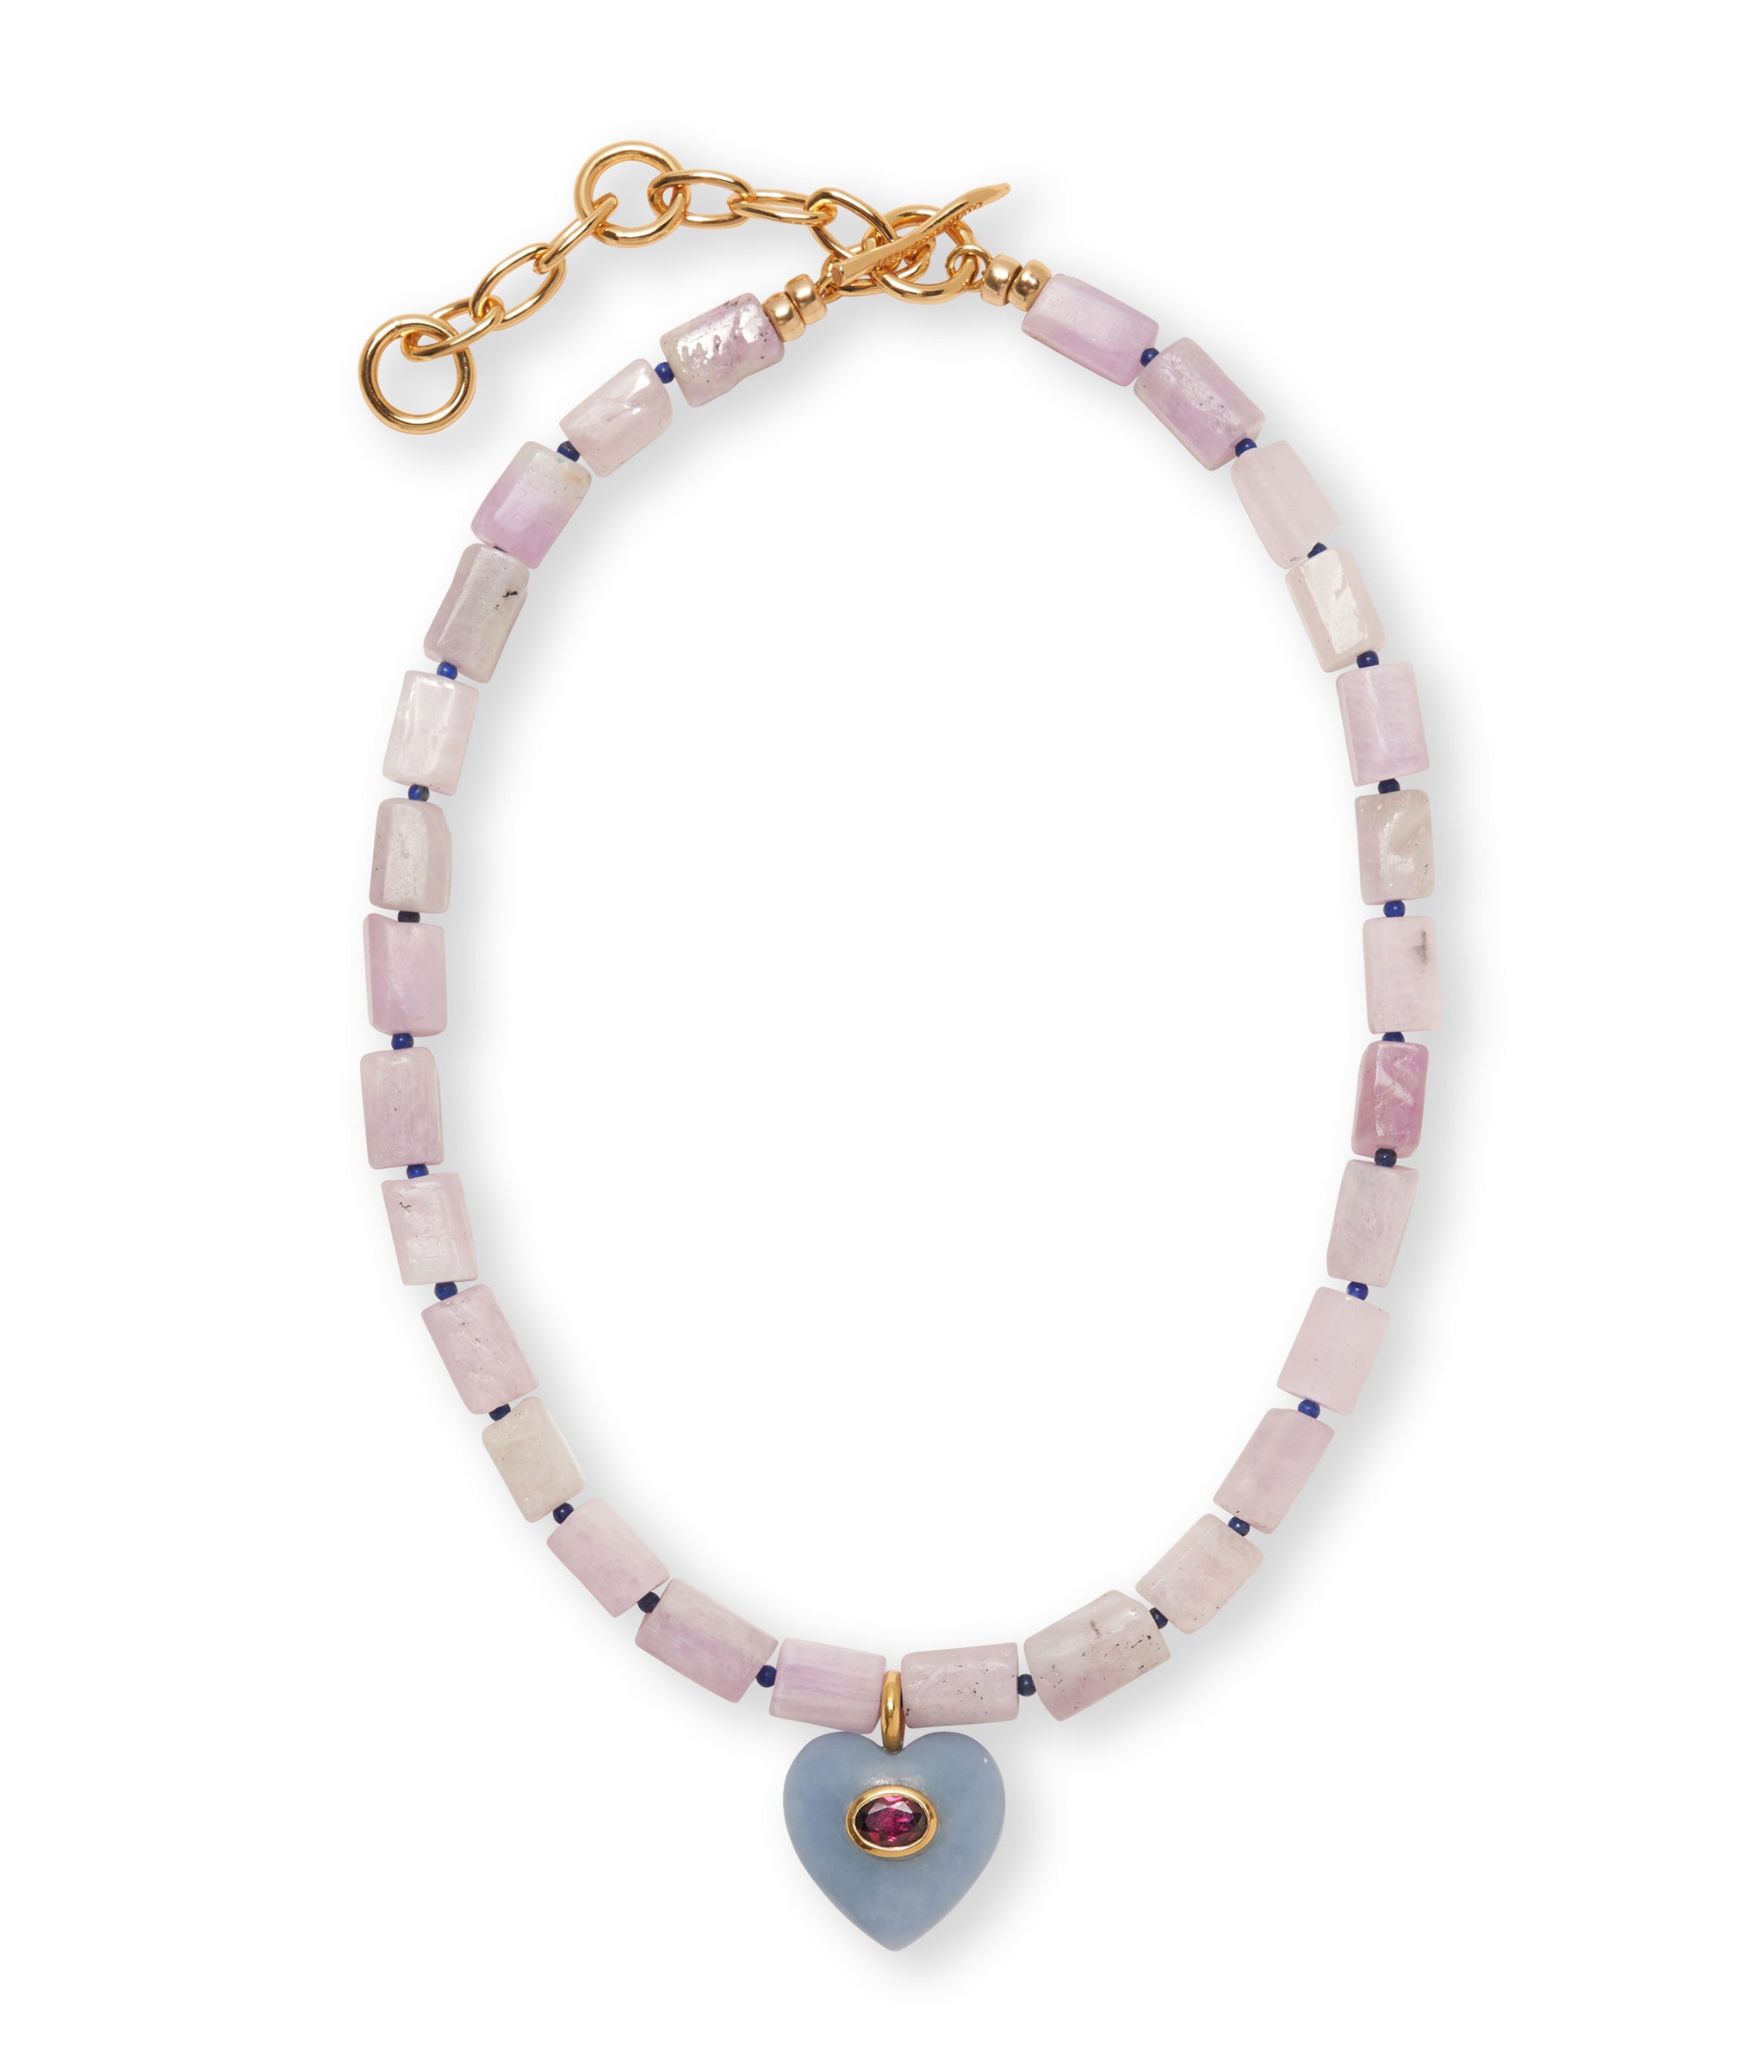 Infatuation Necklace in Angelite. Beaded necklace of kunzite and lapis, hand-carved angelite heart with pink rhodolite.